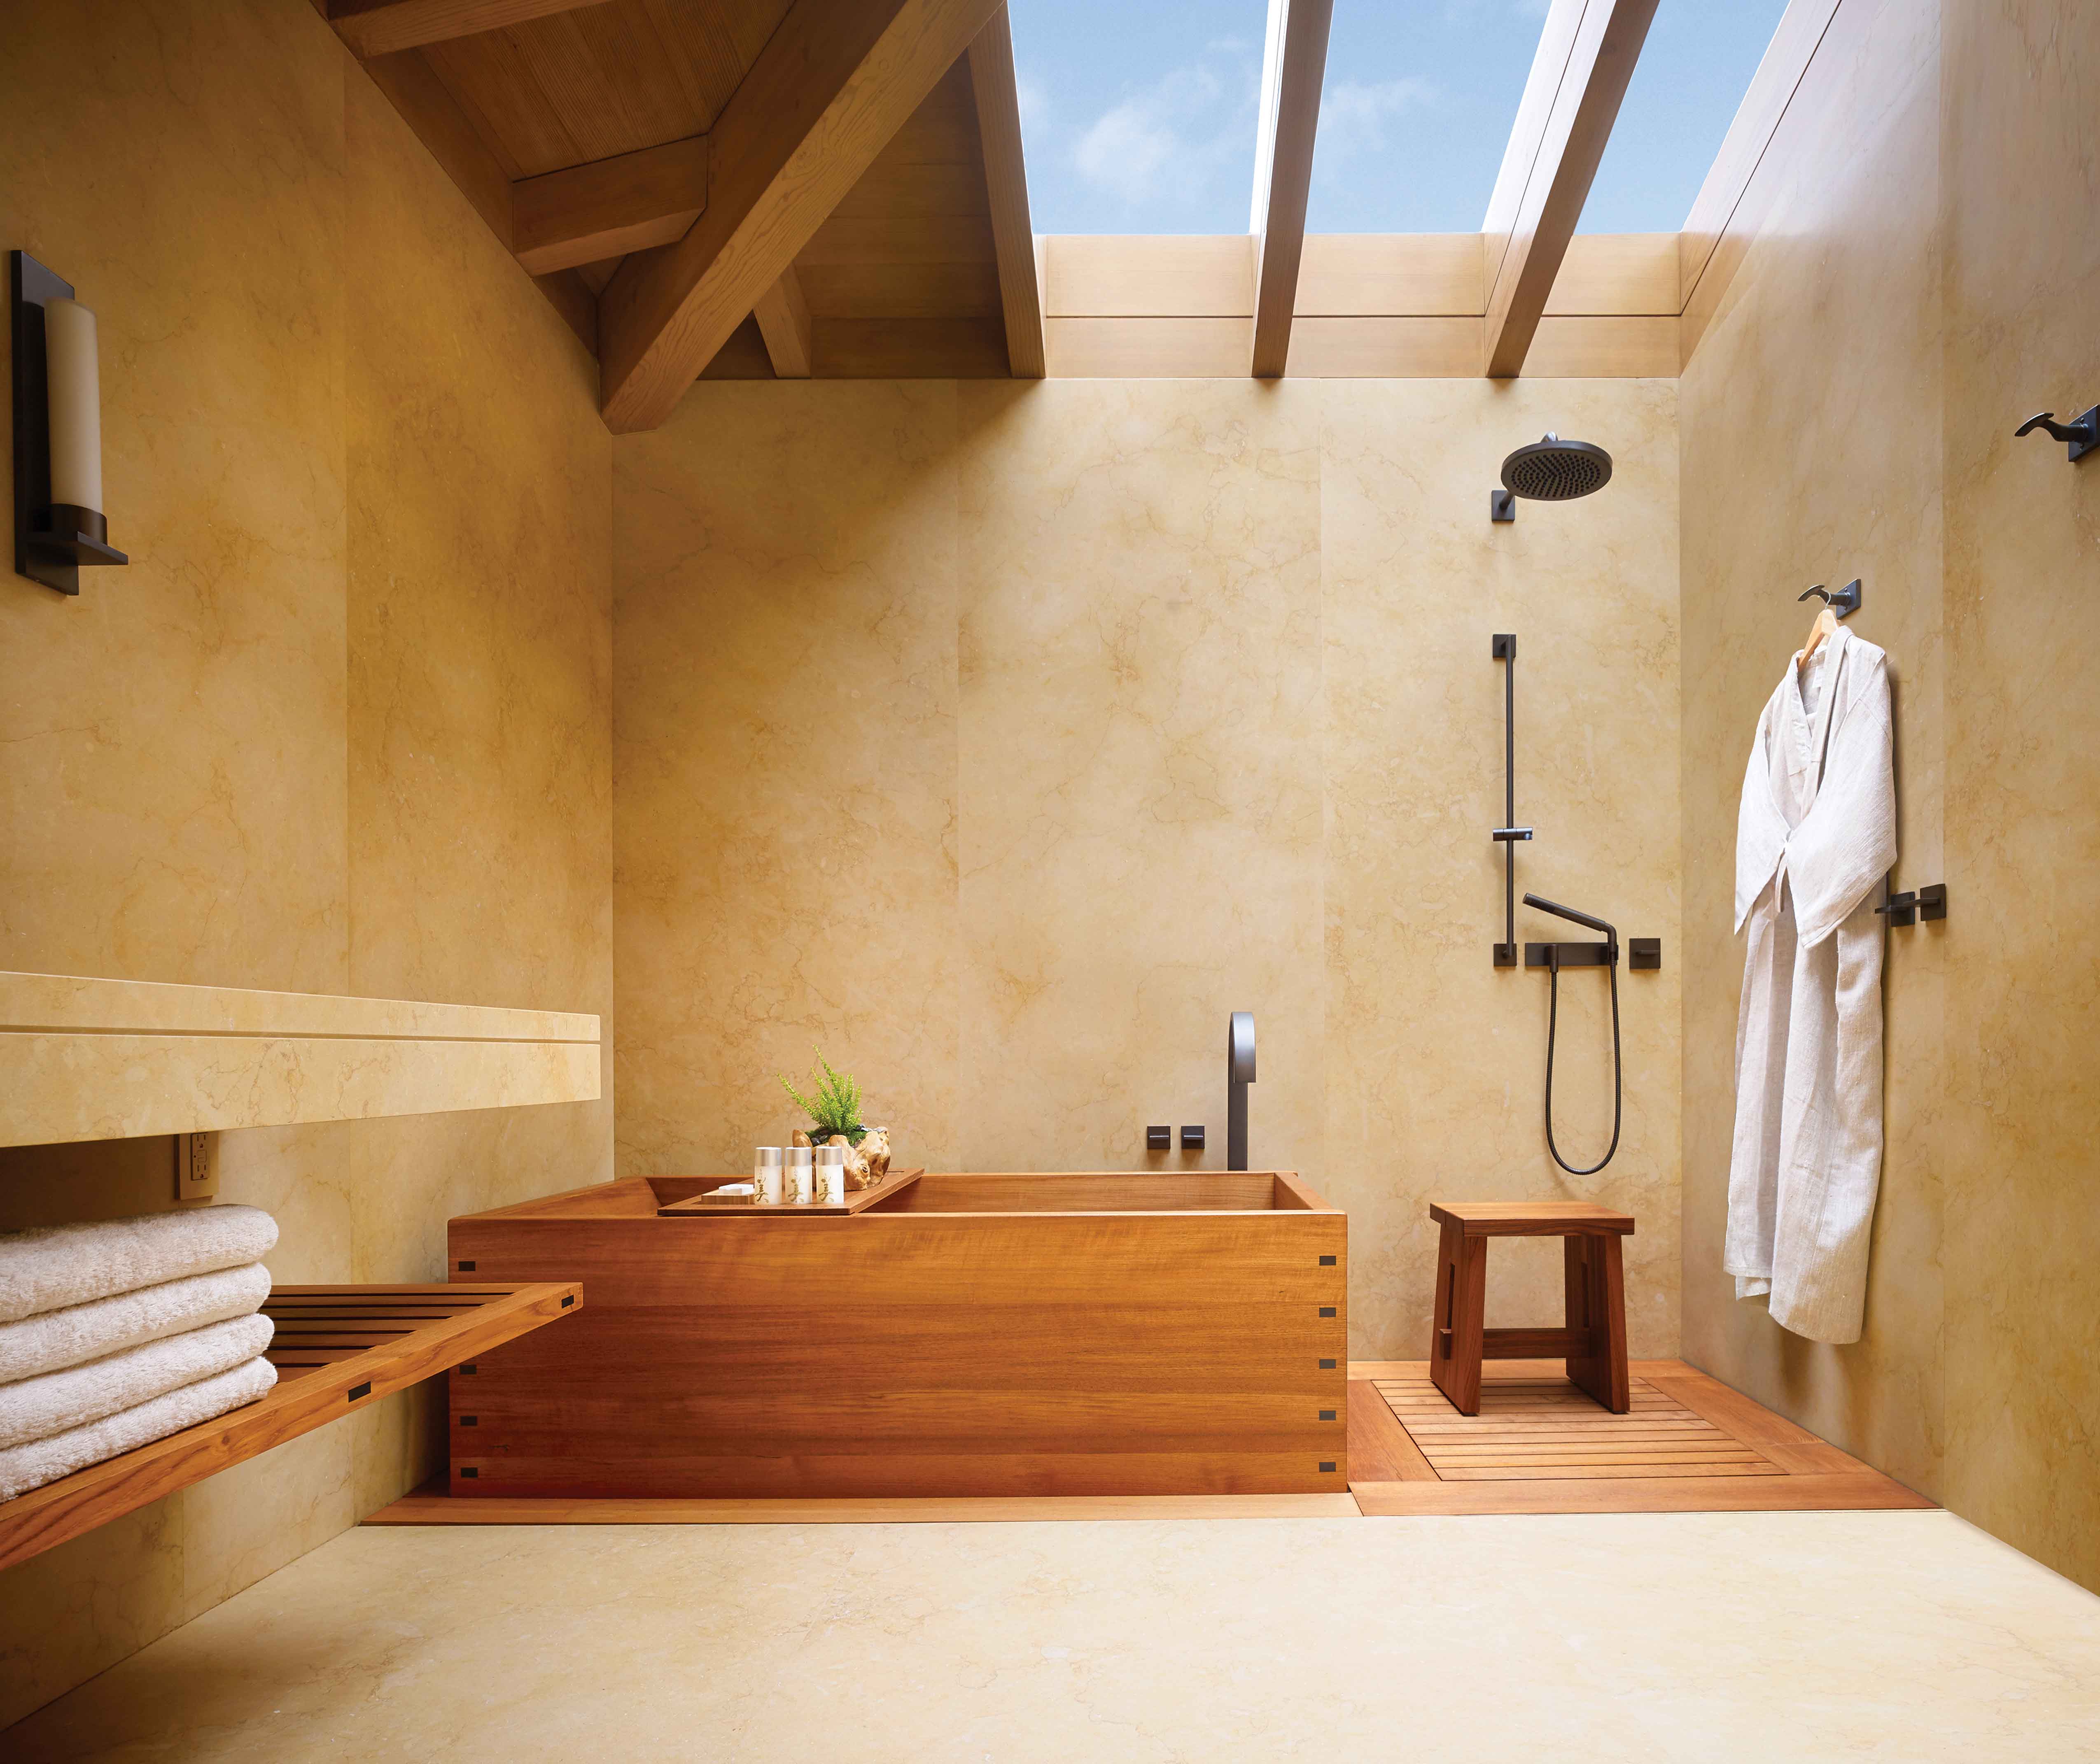 The bathroom of one of the bedrooms with a rainfall shower, teakwood soaking tub, Nobu robe hung on the wall, exposed ceilings and wooden interiors